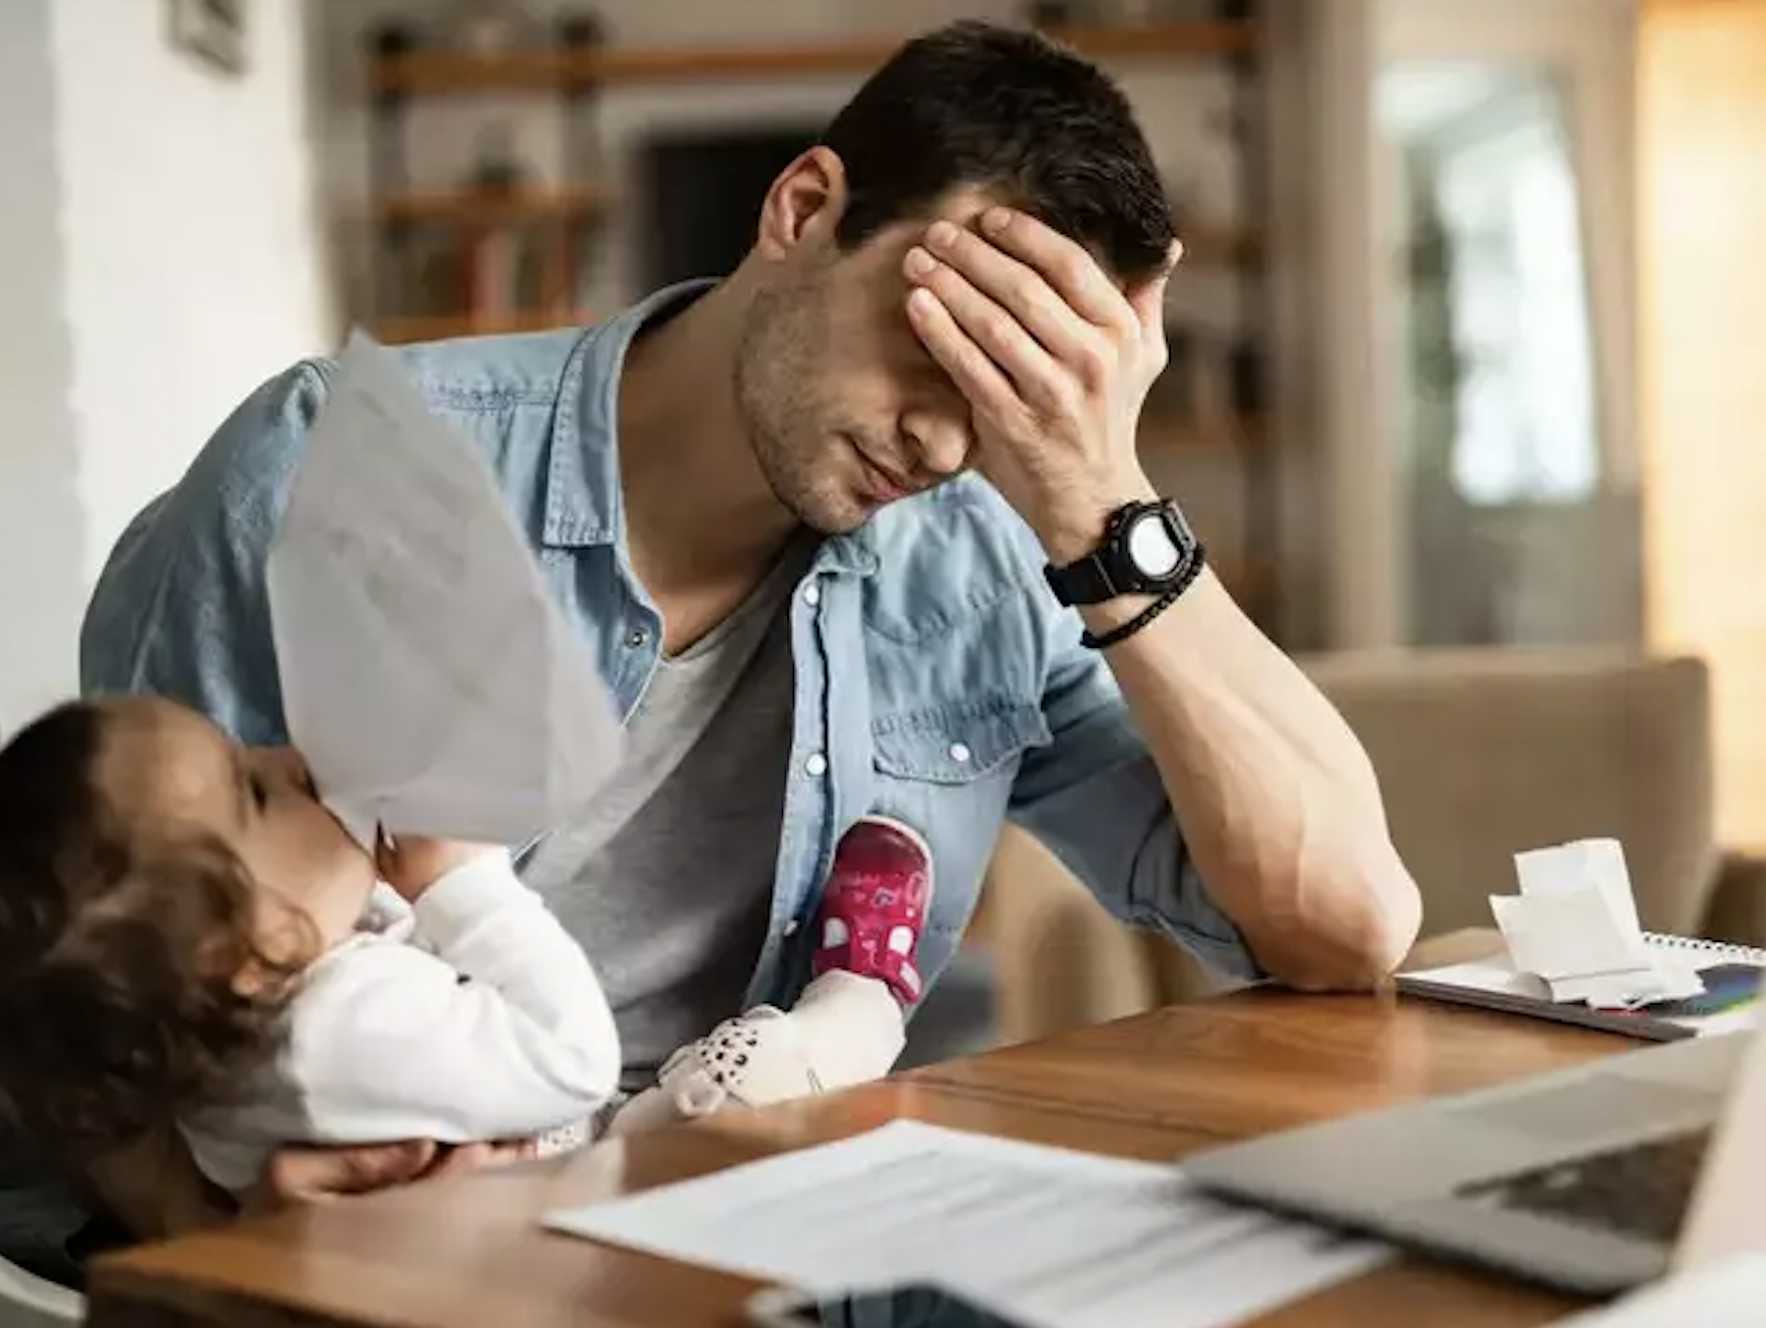 Father very fatigued while holding infant